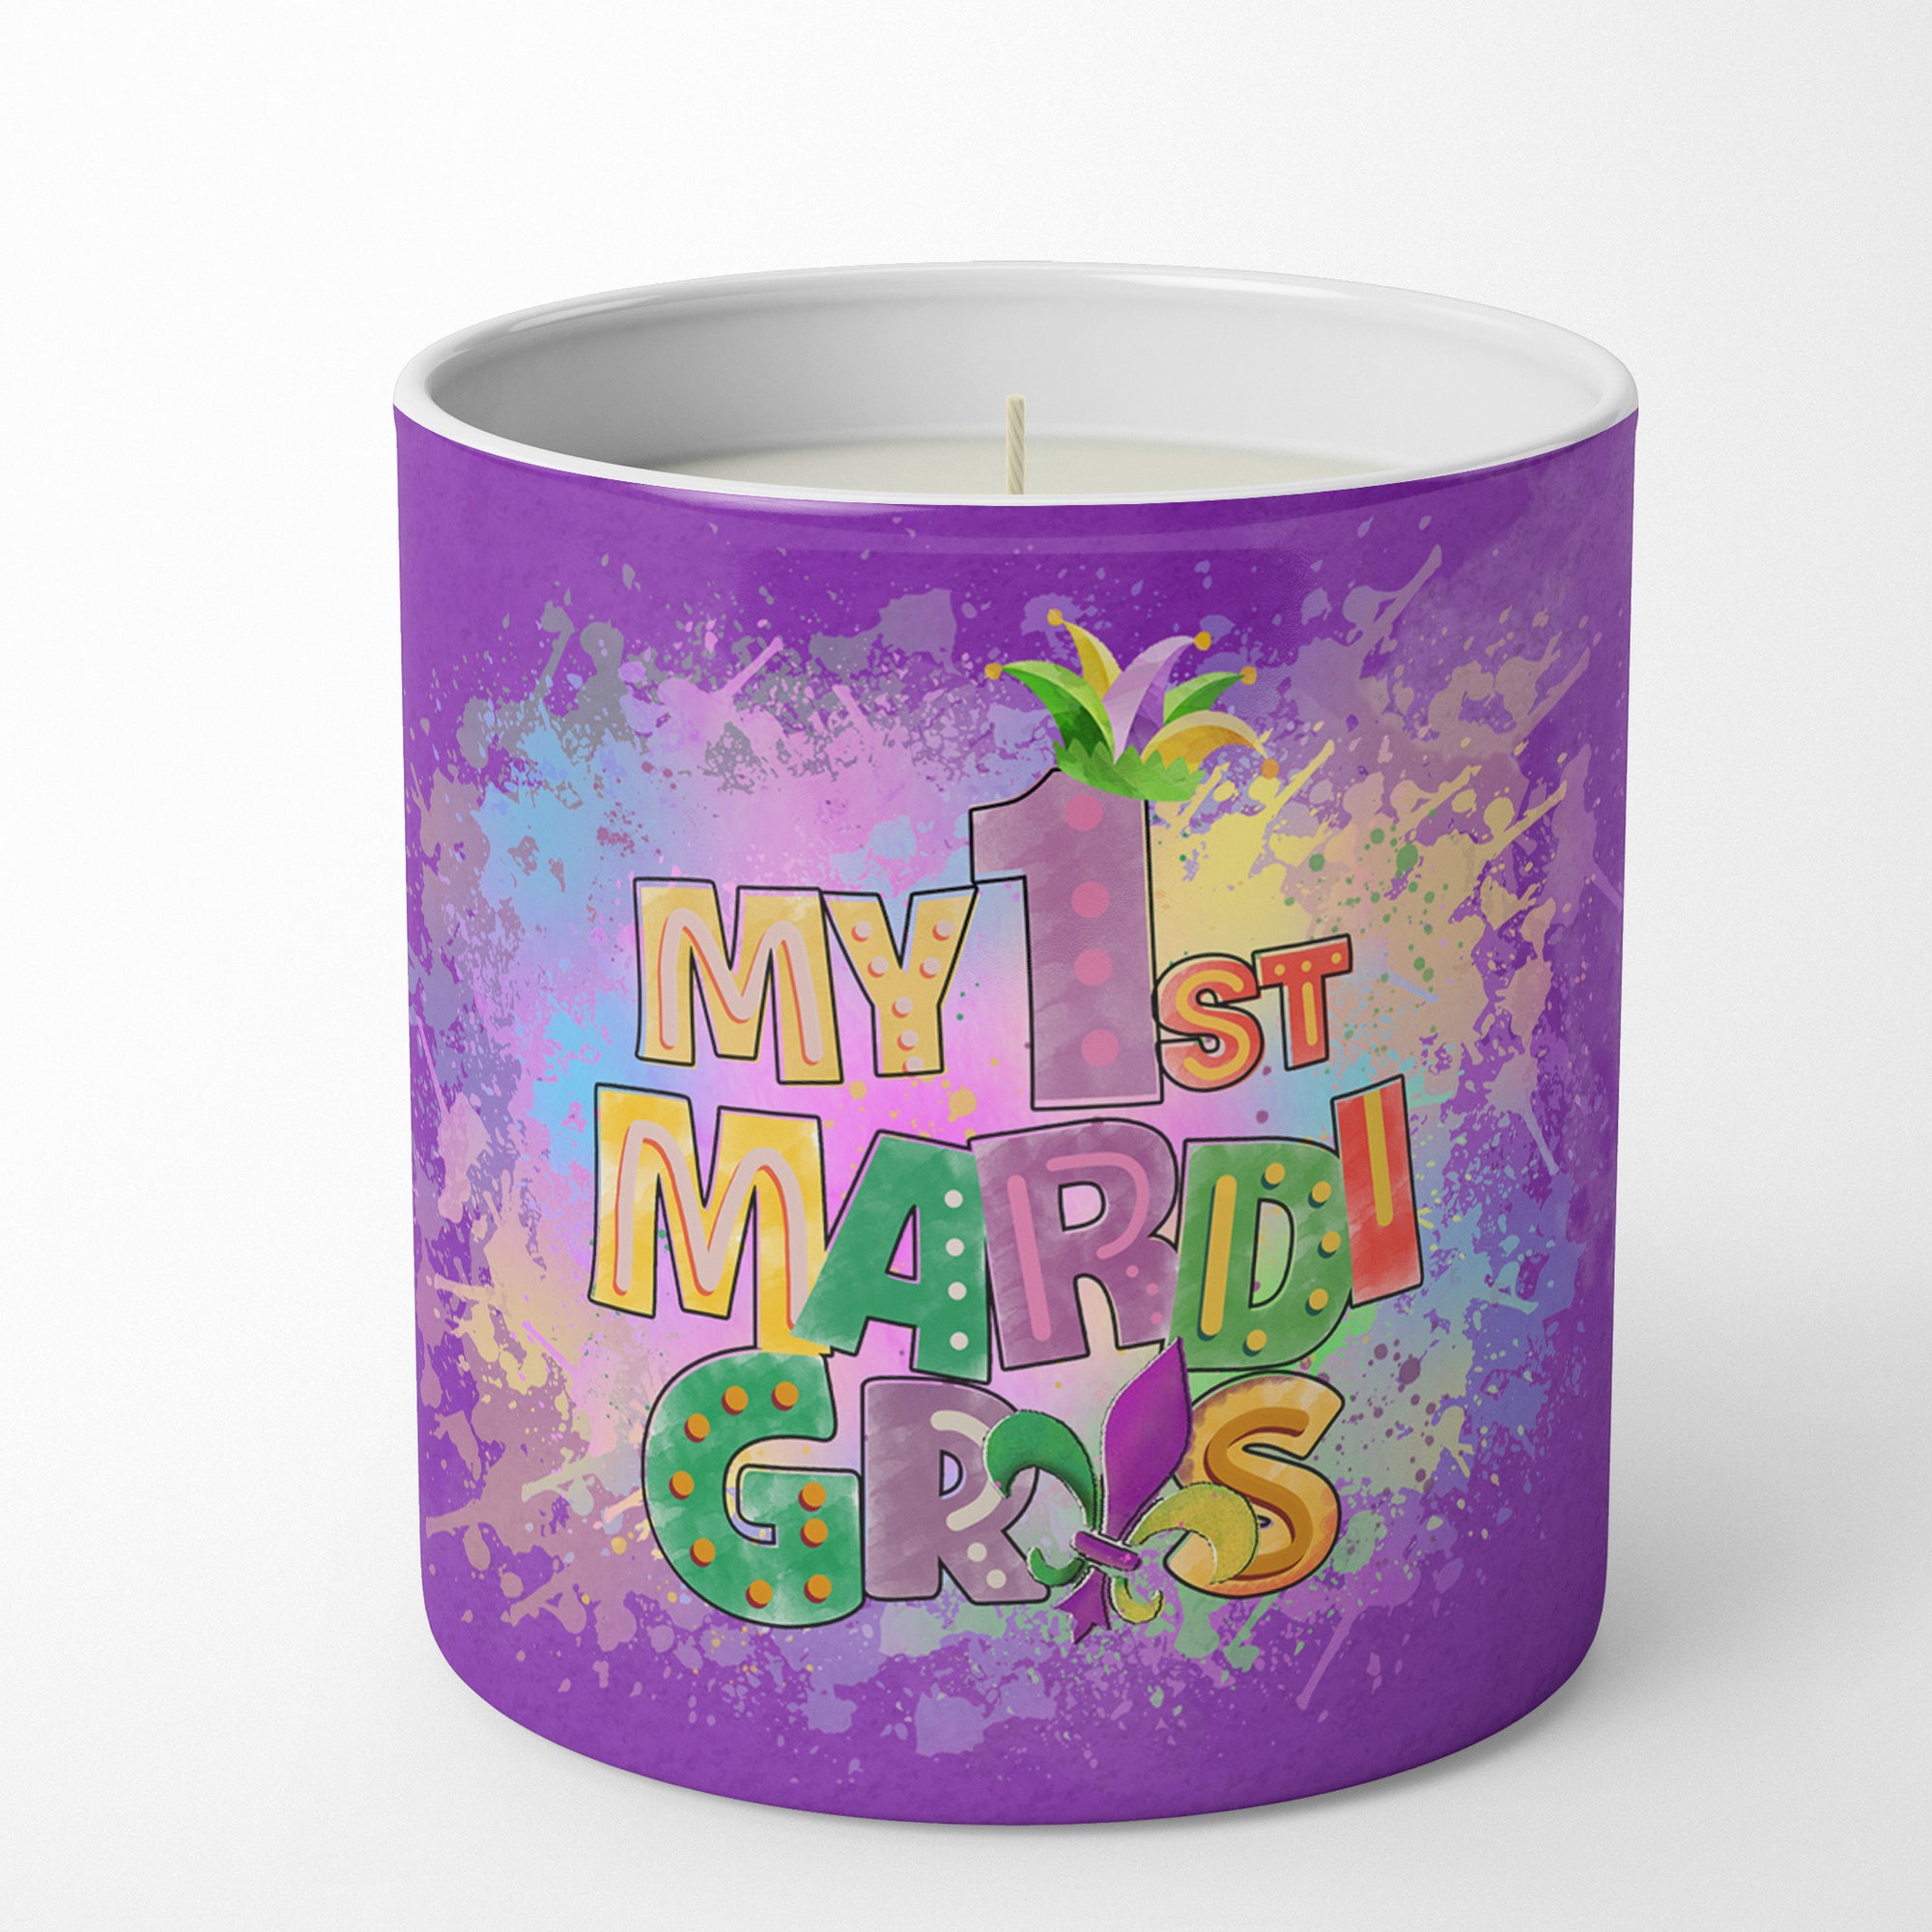 Buy this My 1st Mardi Gras 10 oz Decorative Soy Candle